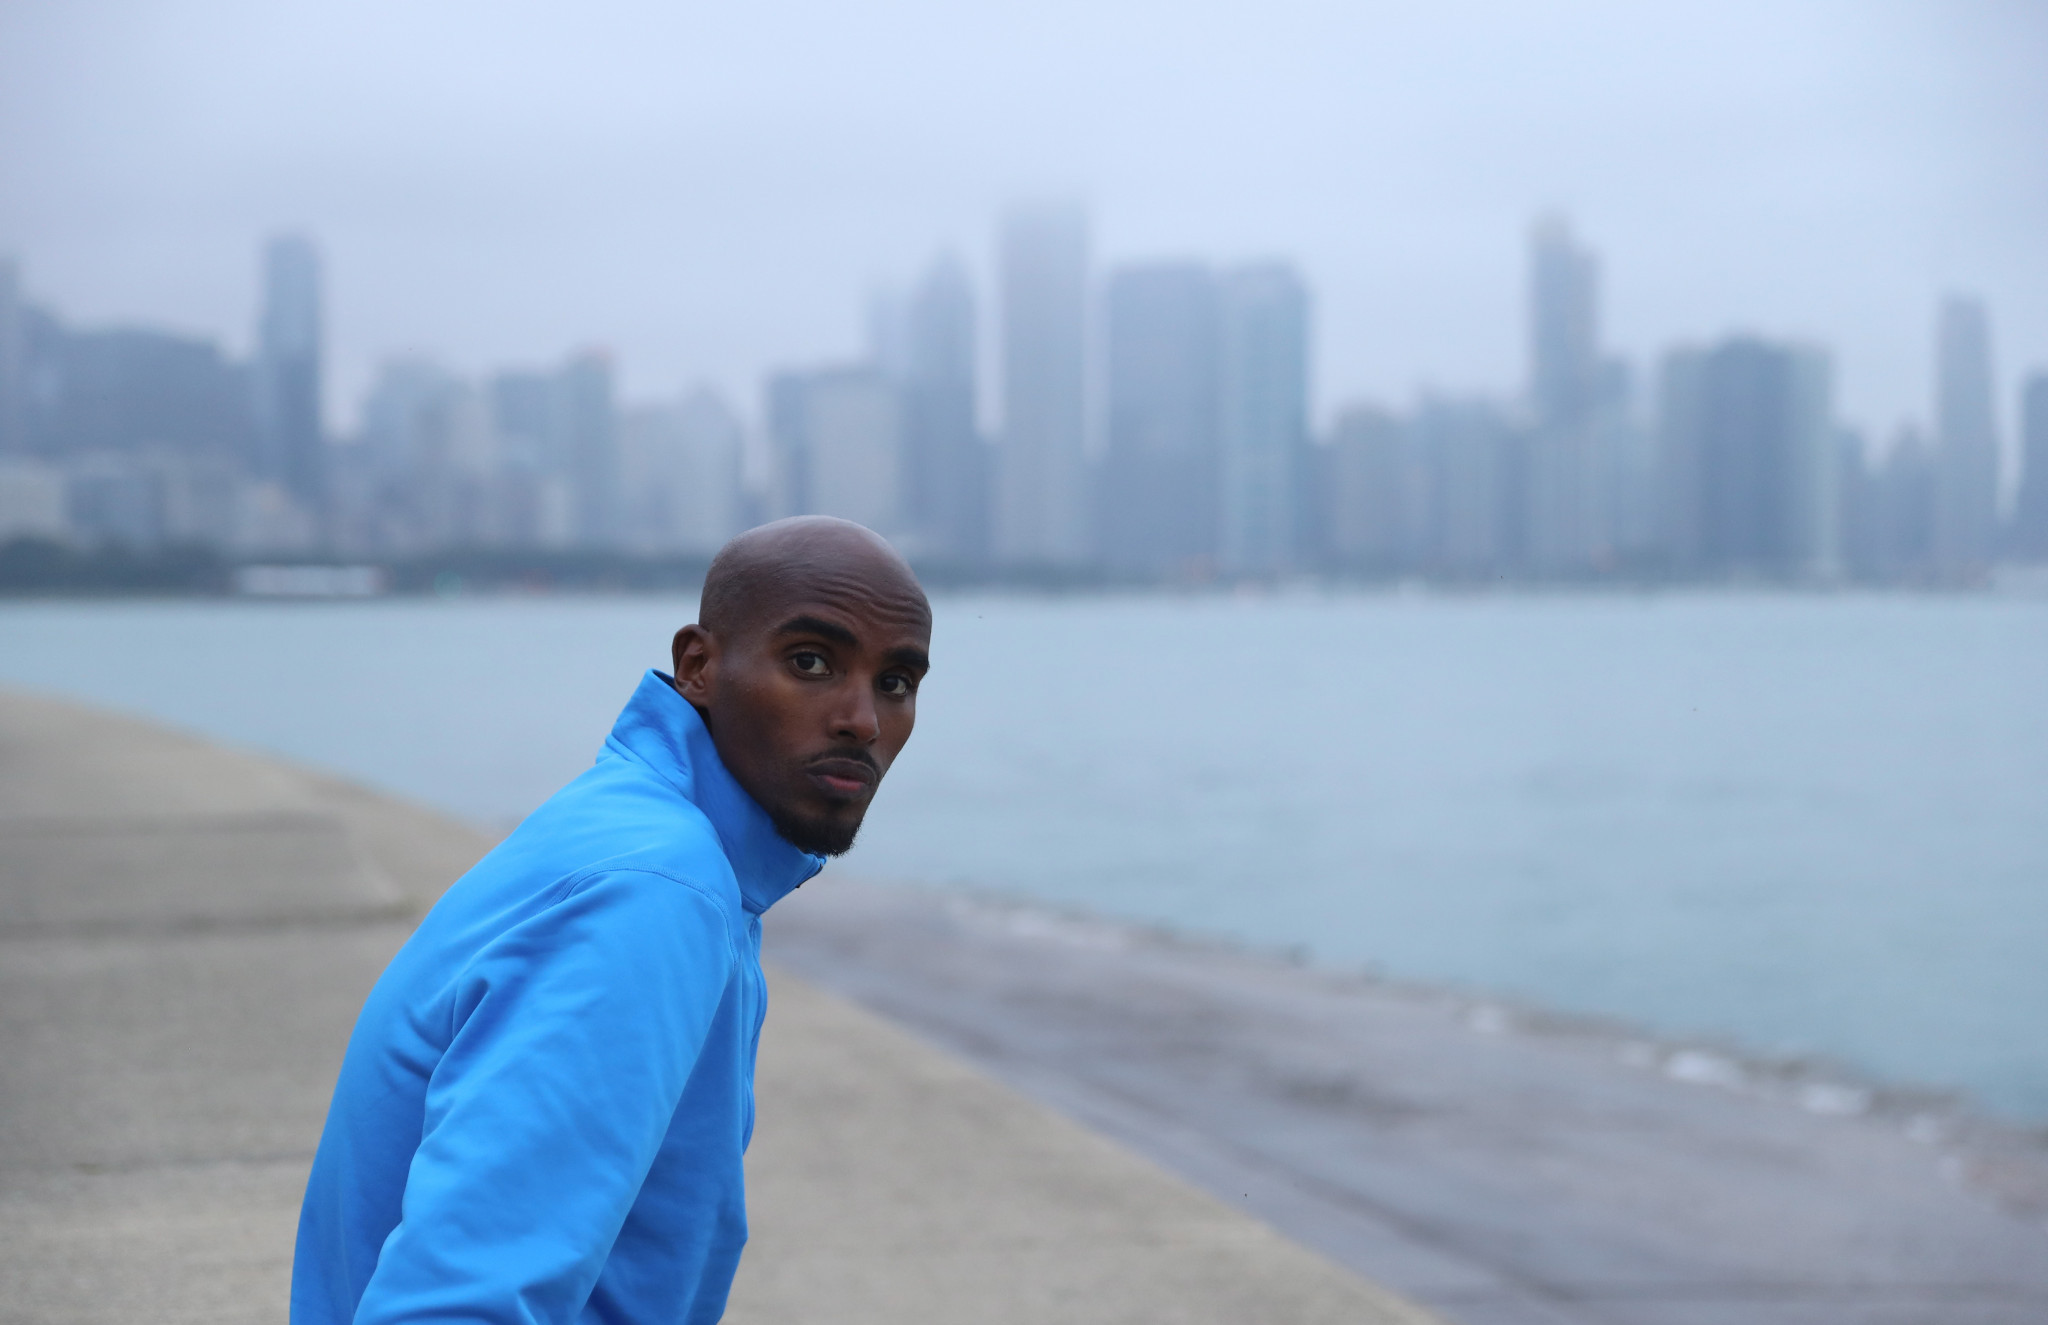 Farah and previous winners among strong start-list for Chicago Marathon